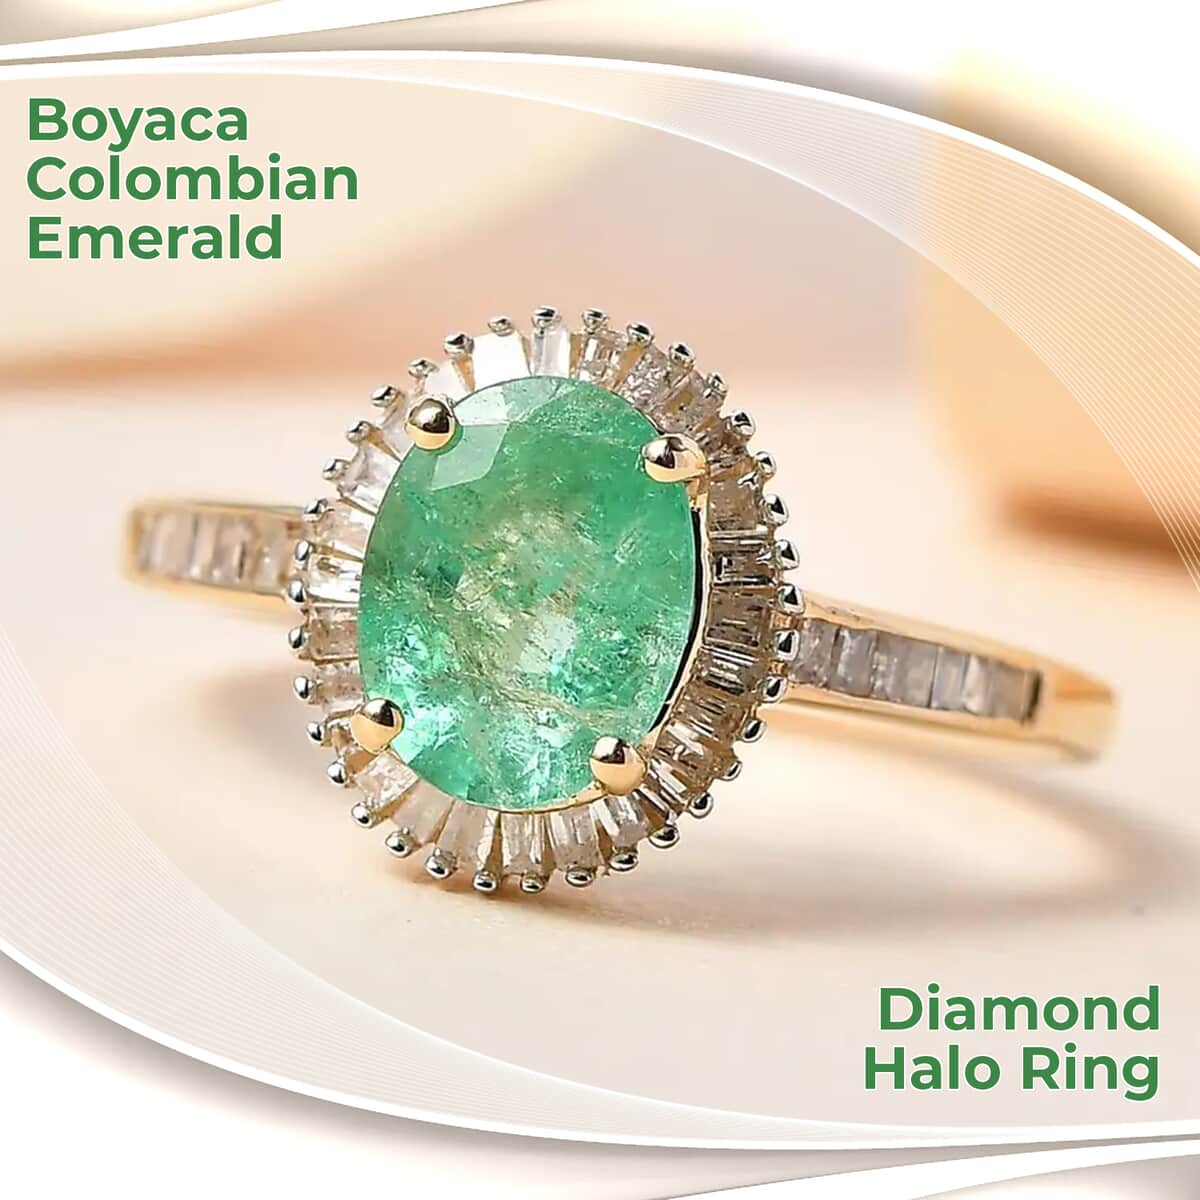 Luxoro Boyaca Colombian Emerald Ring, 14K Yellow Gold Ring, Diamond Halo Ring, Emerald Halo Ring, Halo Engagement Ring For Women 1.40 ctw (Size 7) image number 1